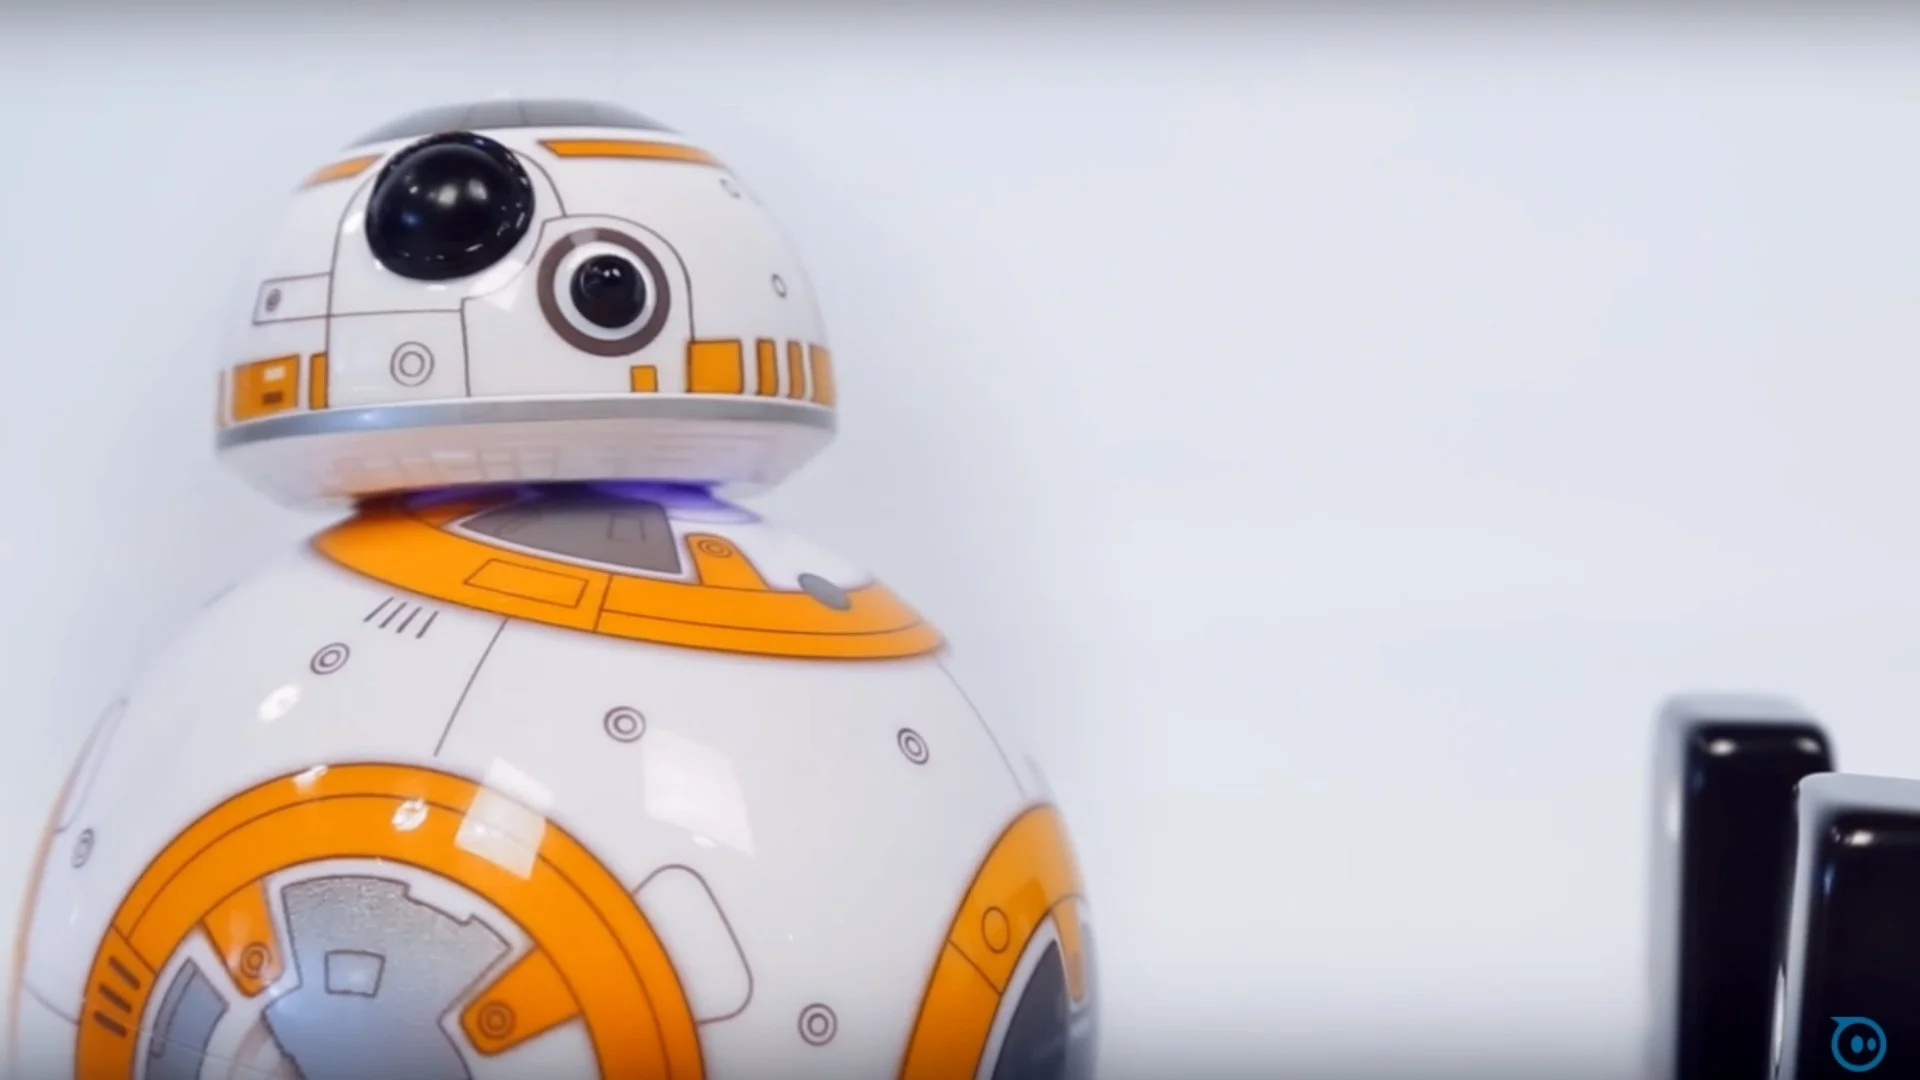 Star Wars: The Force Awakens has produced the most incredible characters,  but none cuter